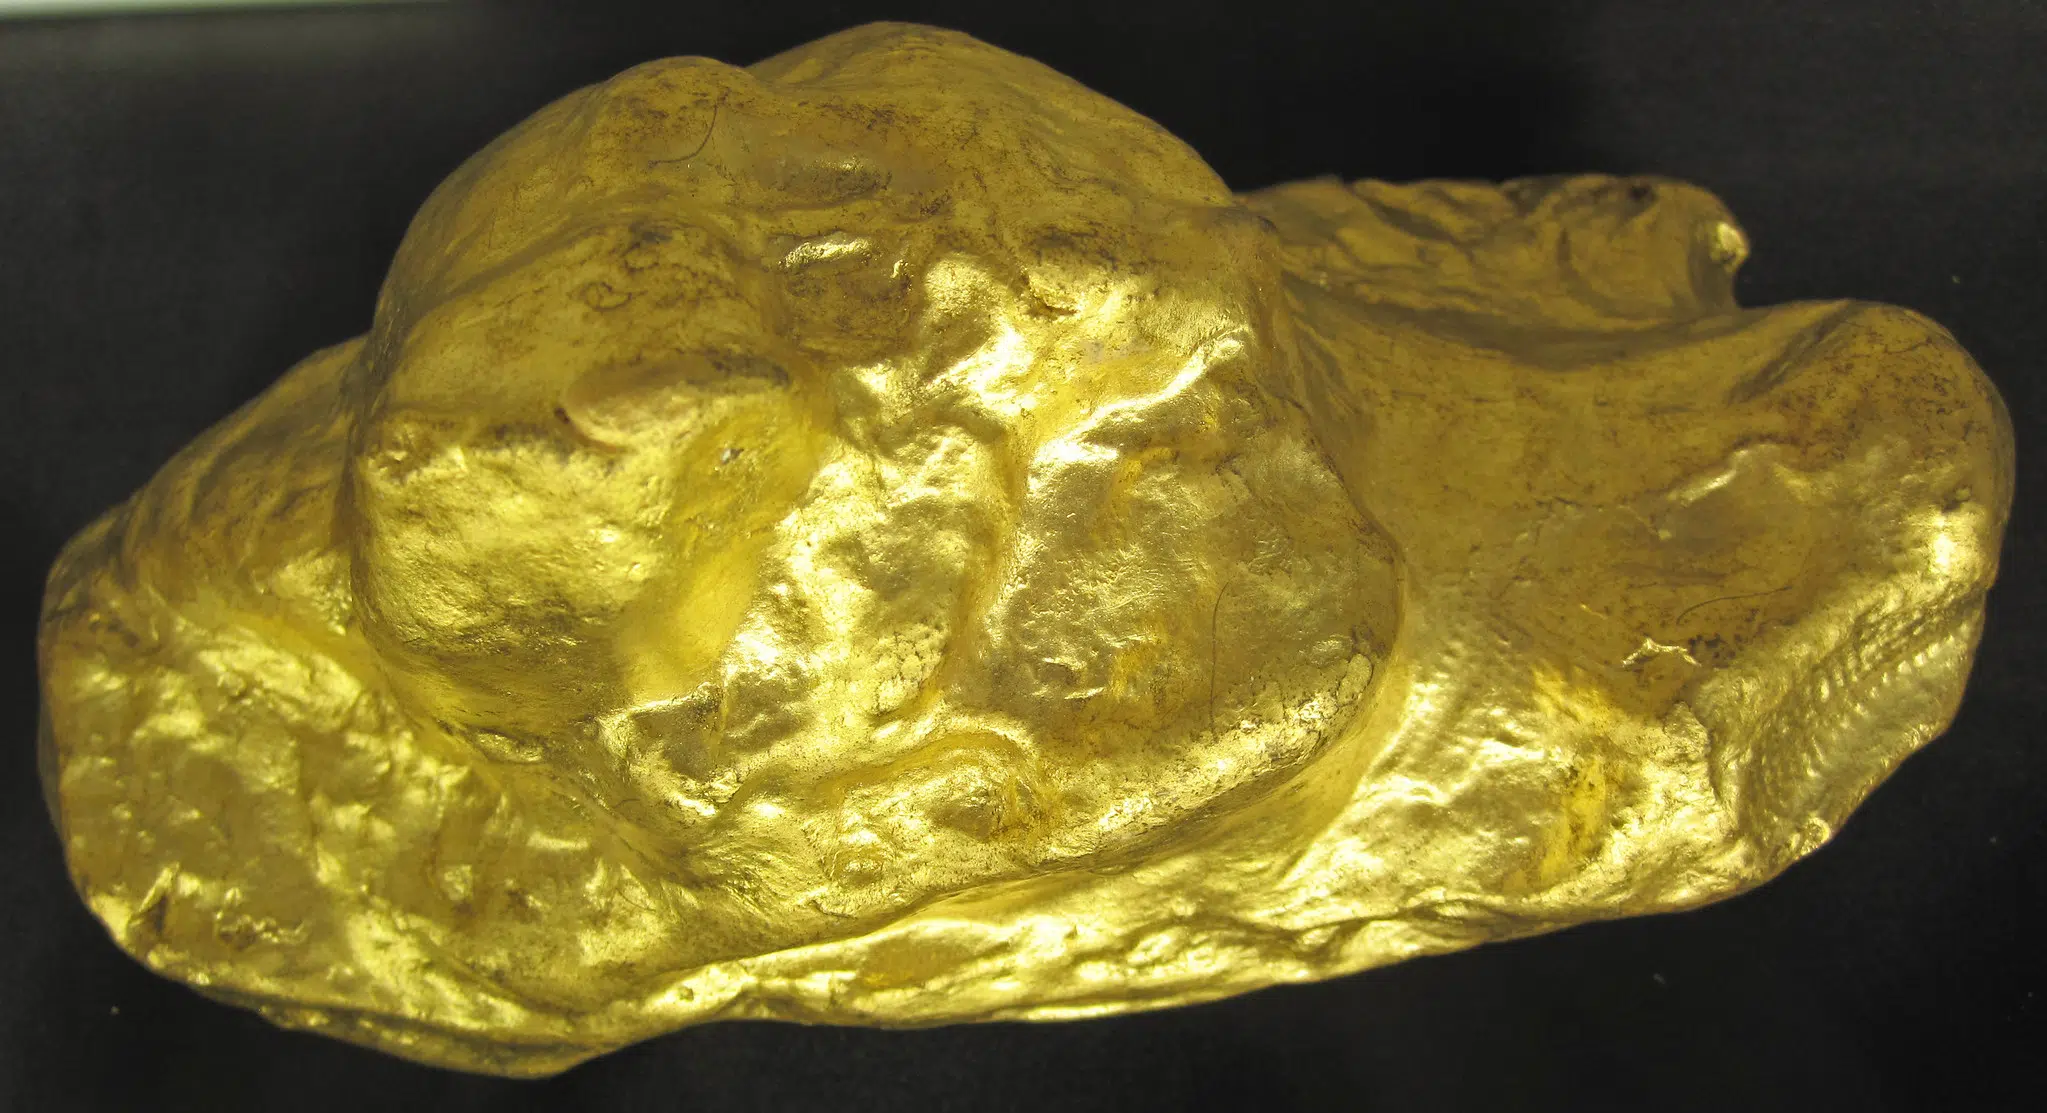 A detectorist with a faulty metal detector has unearthed England's biggest ever gold nugget